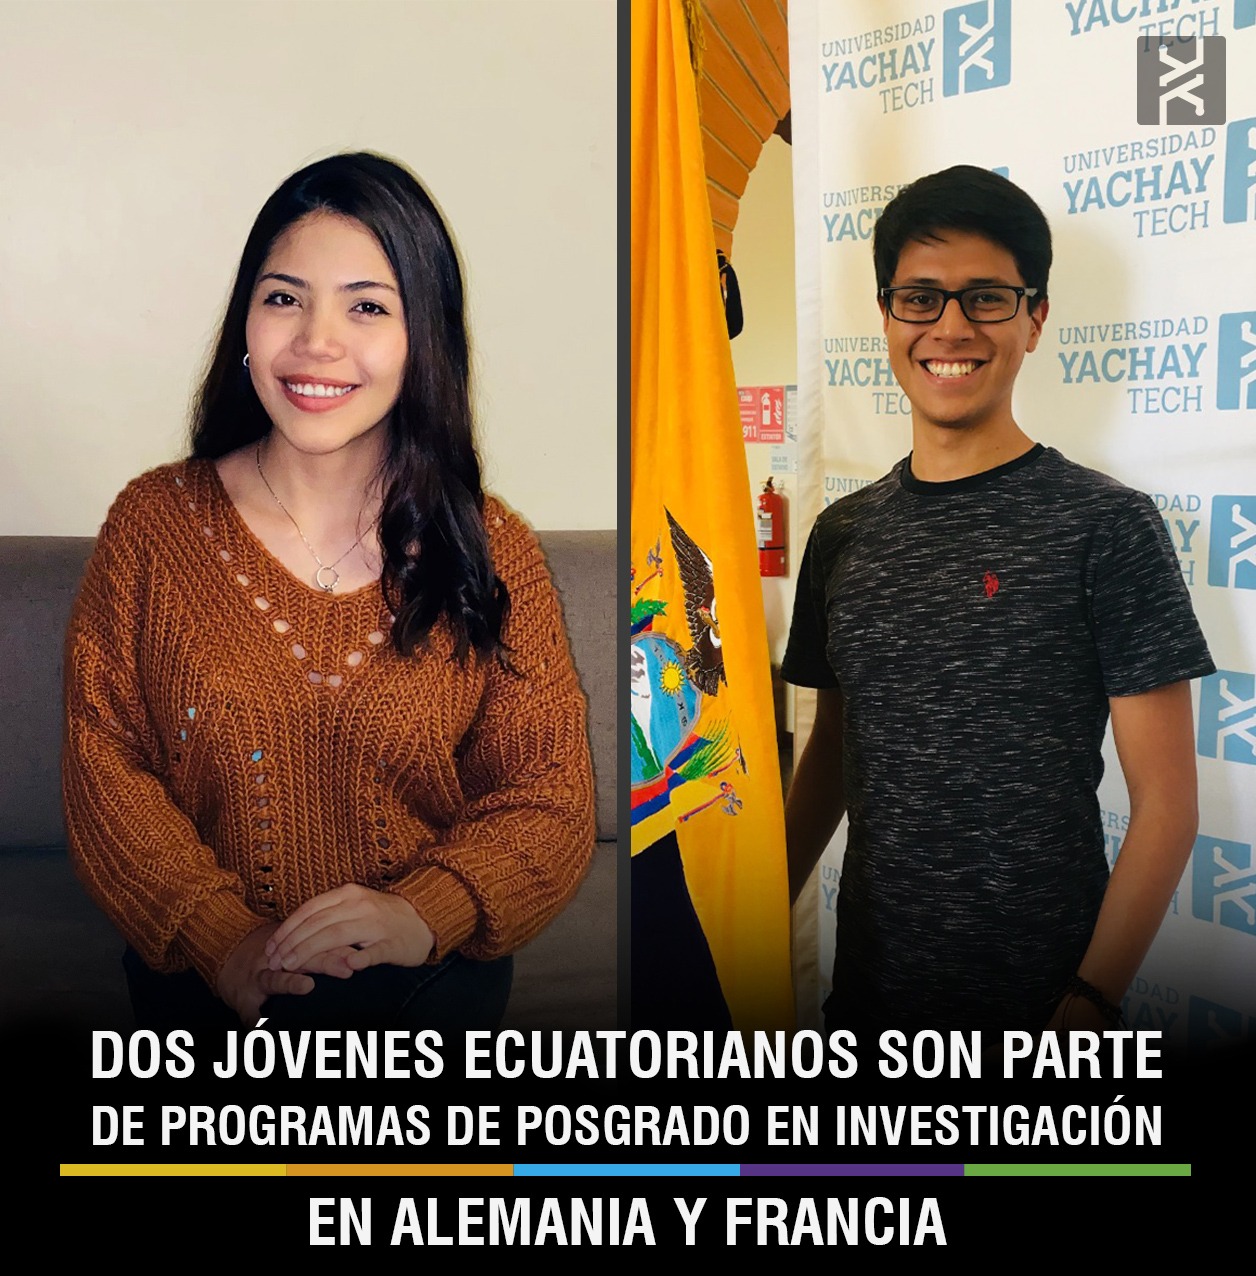 TWO YOUNG ECUADORIANS ARE PART OF POSTGRADUATE RESEARCH PROGRAMS IN GERMANY AND FRANCE